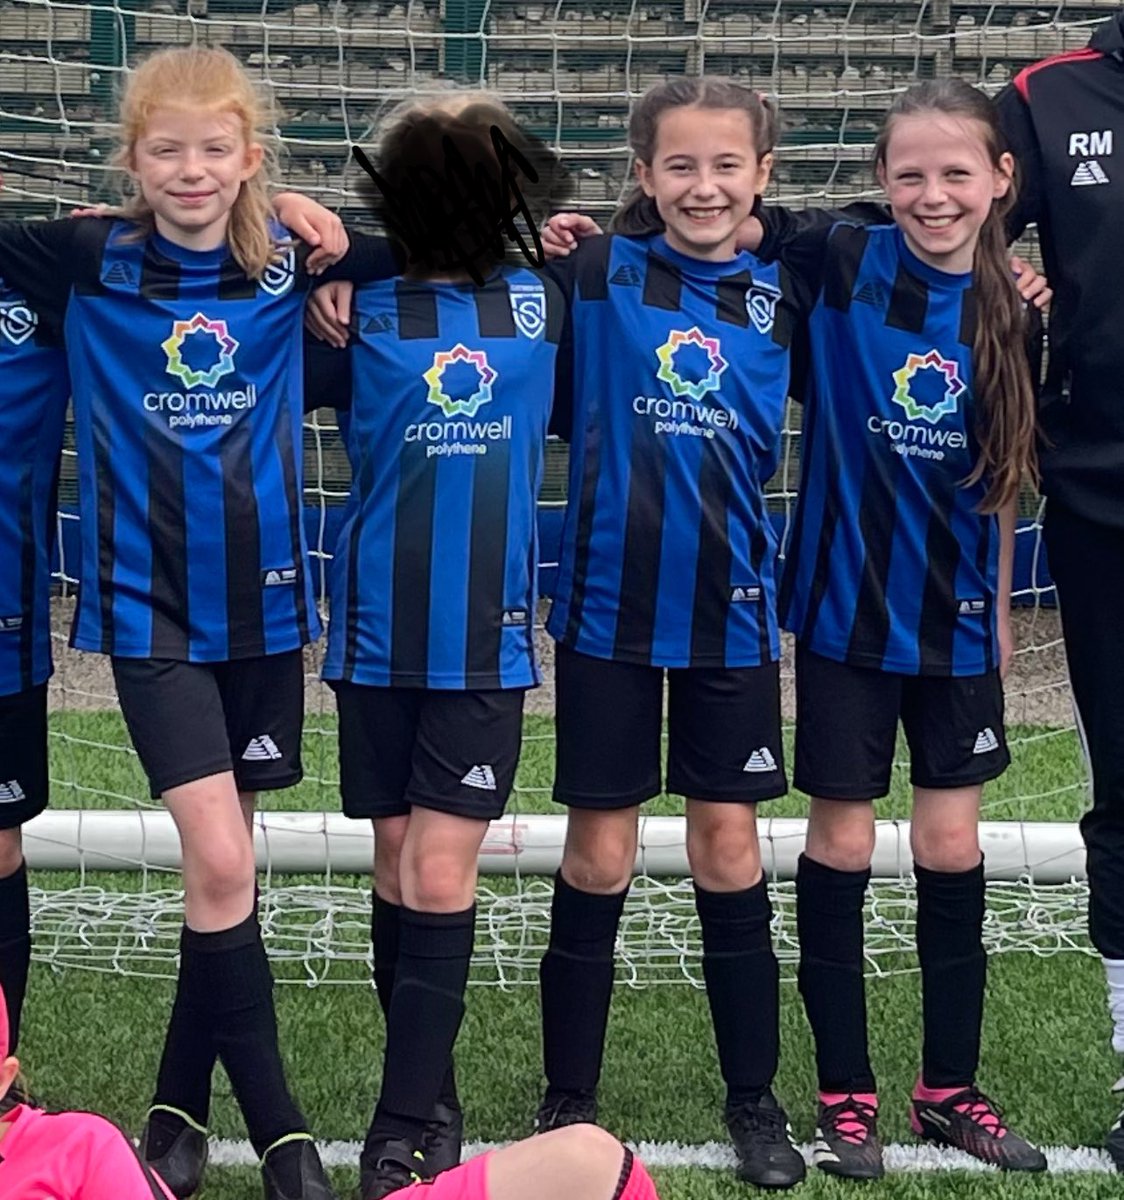 An incredible win for the girls this morning after going behind twice 💪🏼 A stunning first season for the u10s with so many great wins ⚽️ A goal each today for A and M from our @RiddingsJnr contingency! #proudcoach #pride